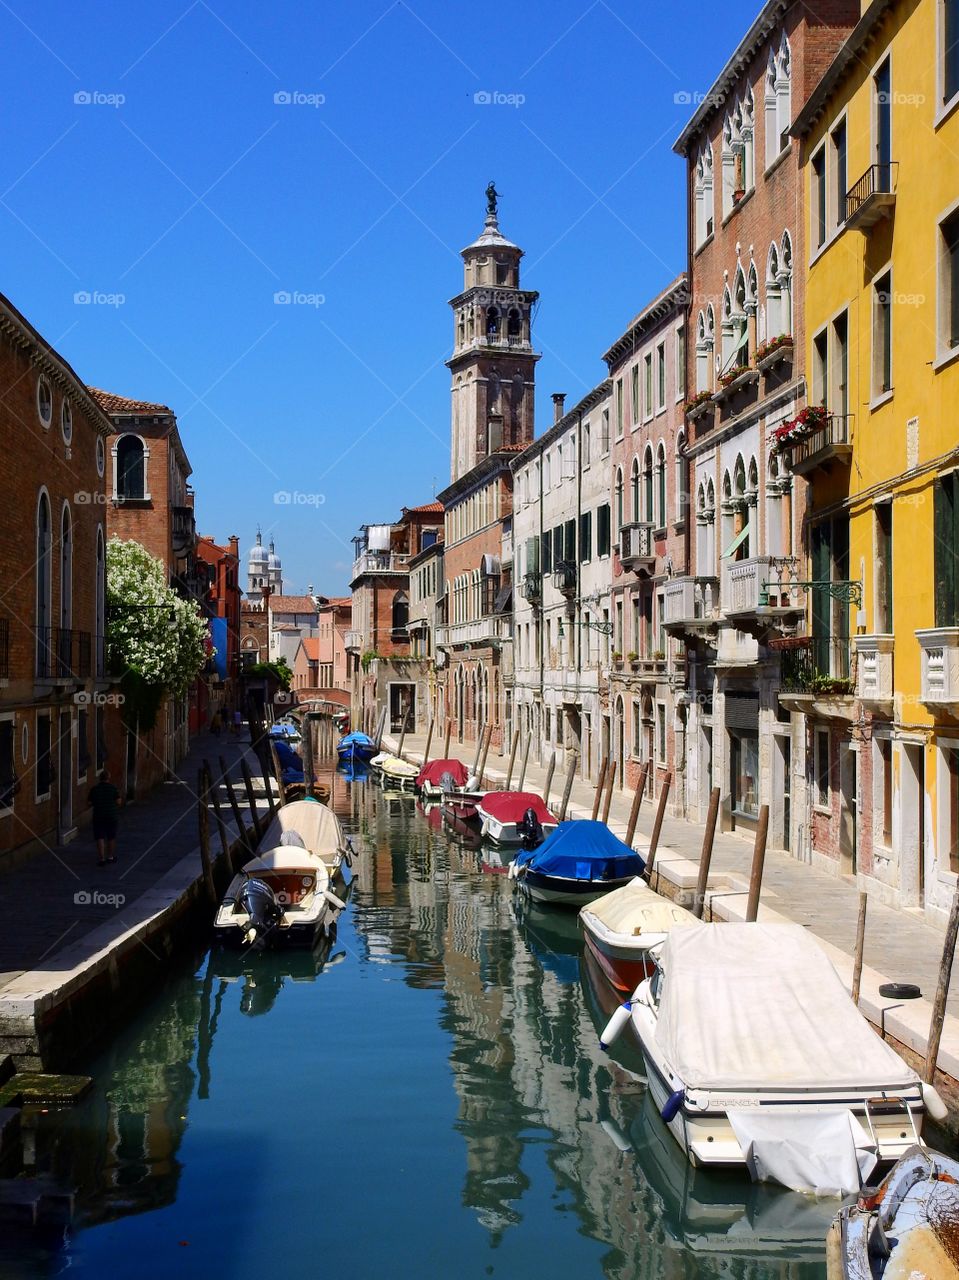 The Wonderful canals of Venice